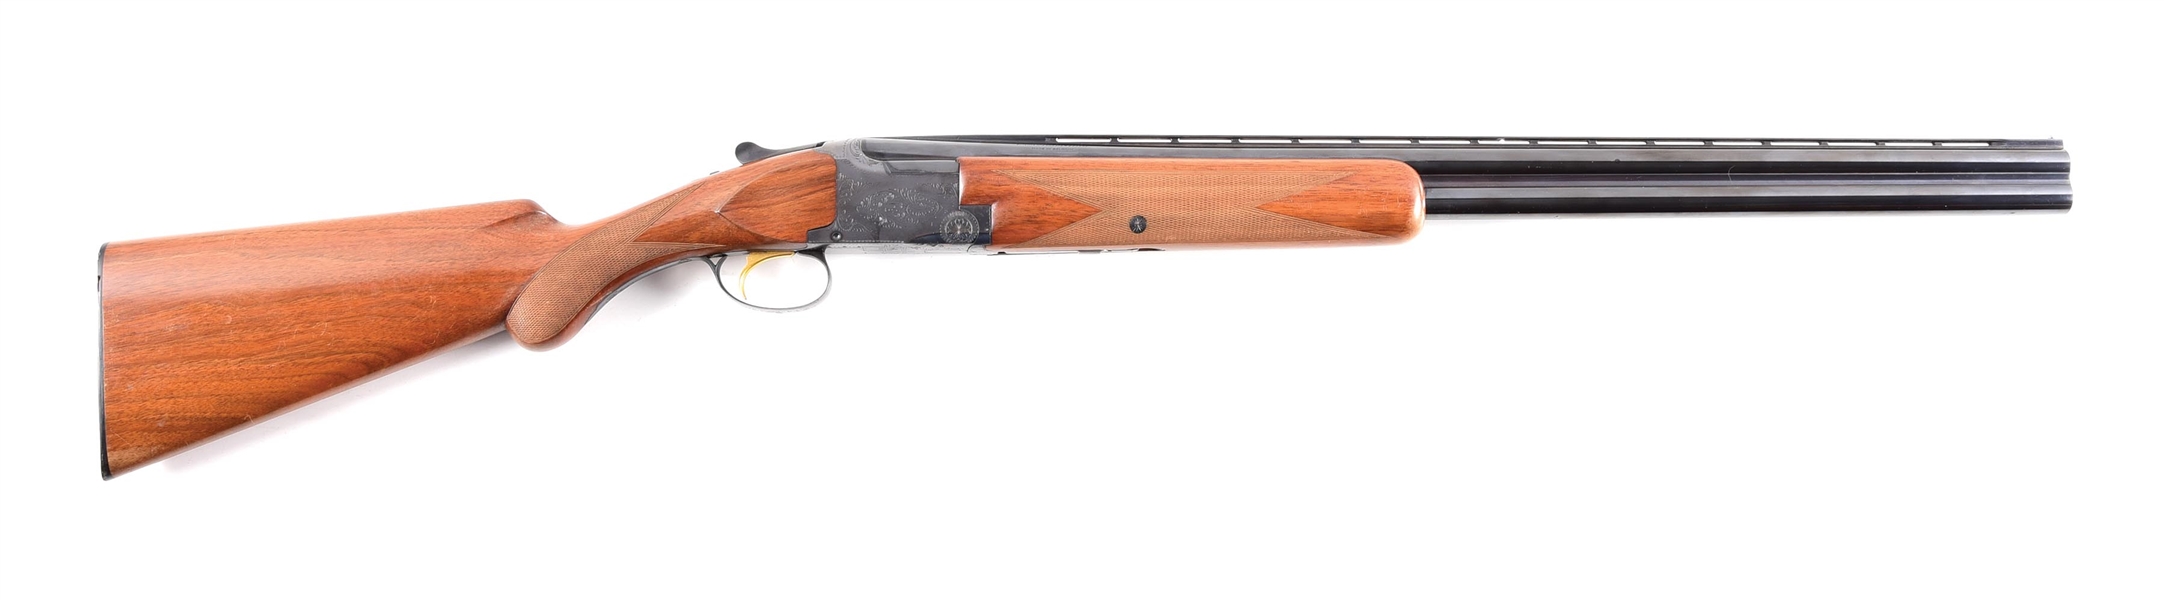 (C) BELGIAN BROWNING SUPERPOSED GRADE I OVER/UNDER 12 BORE SHOTGUN WITH FACTORY BOX.